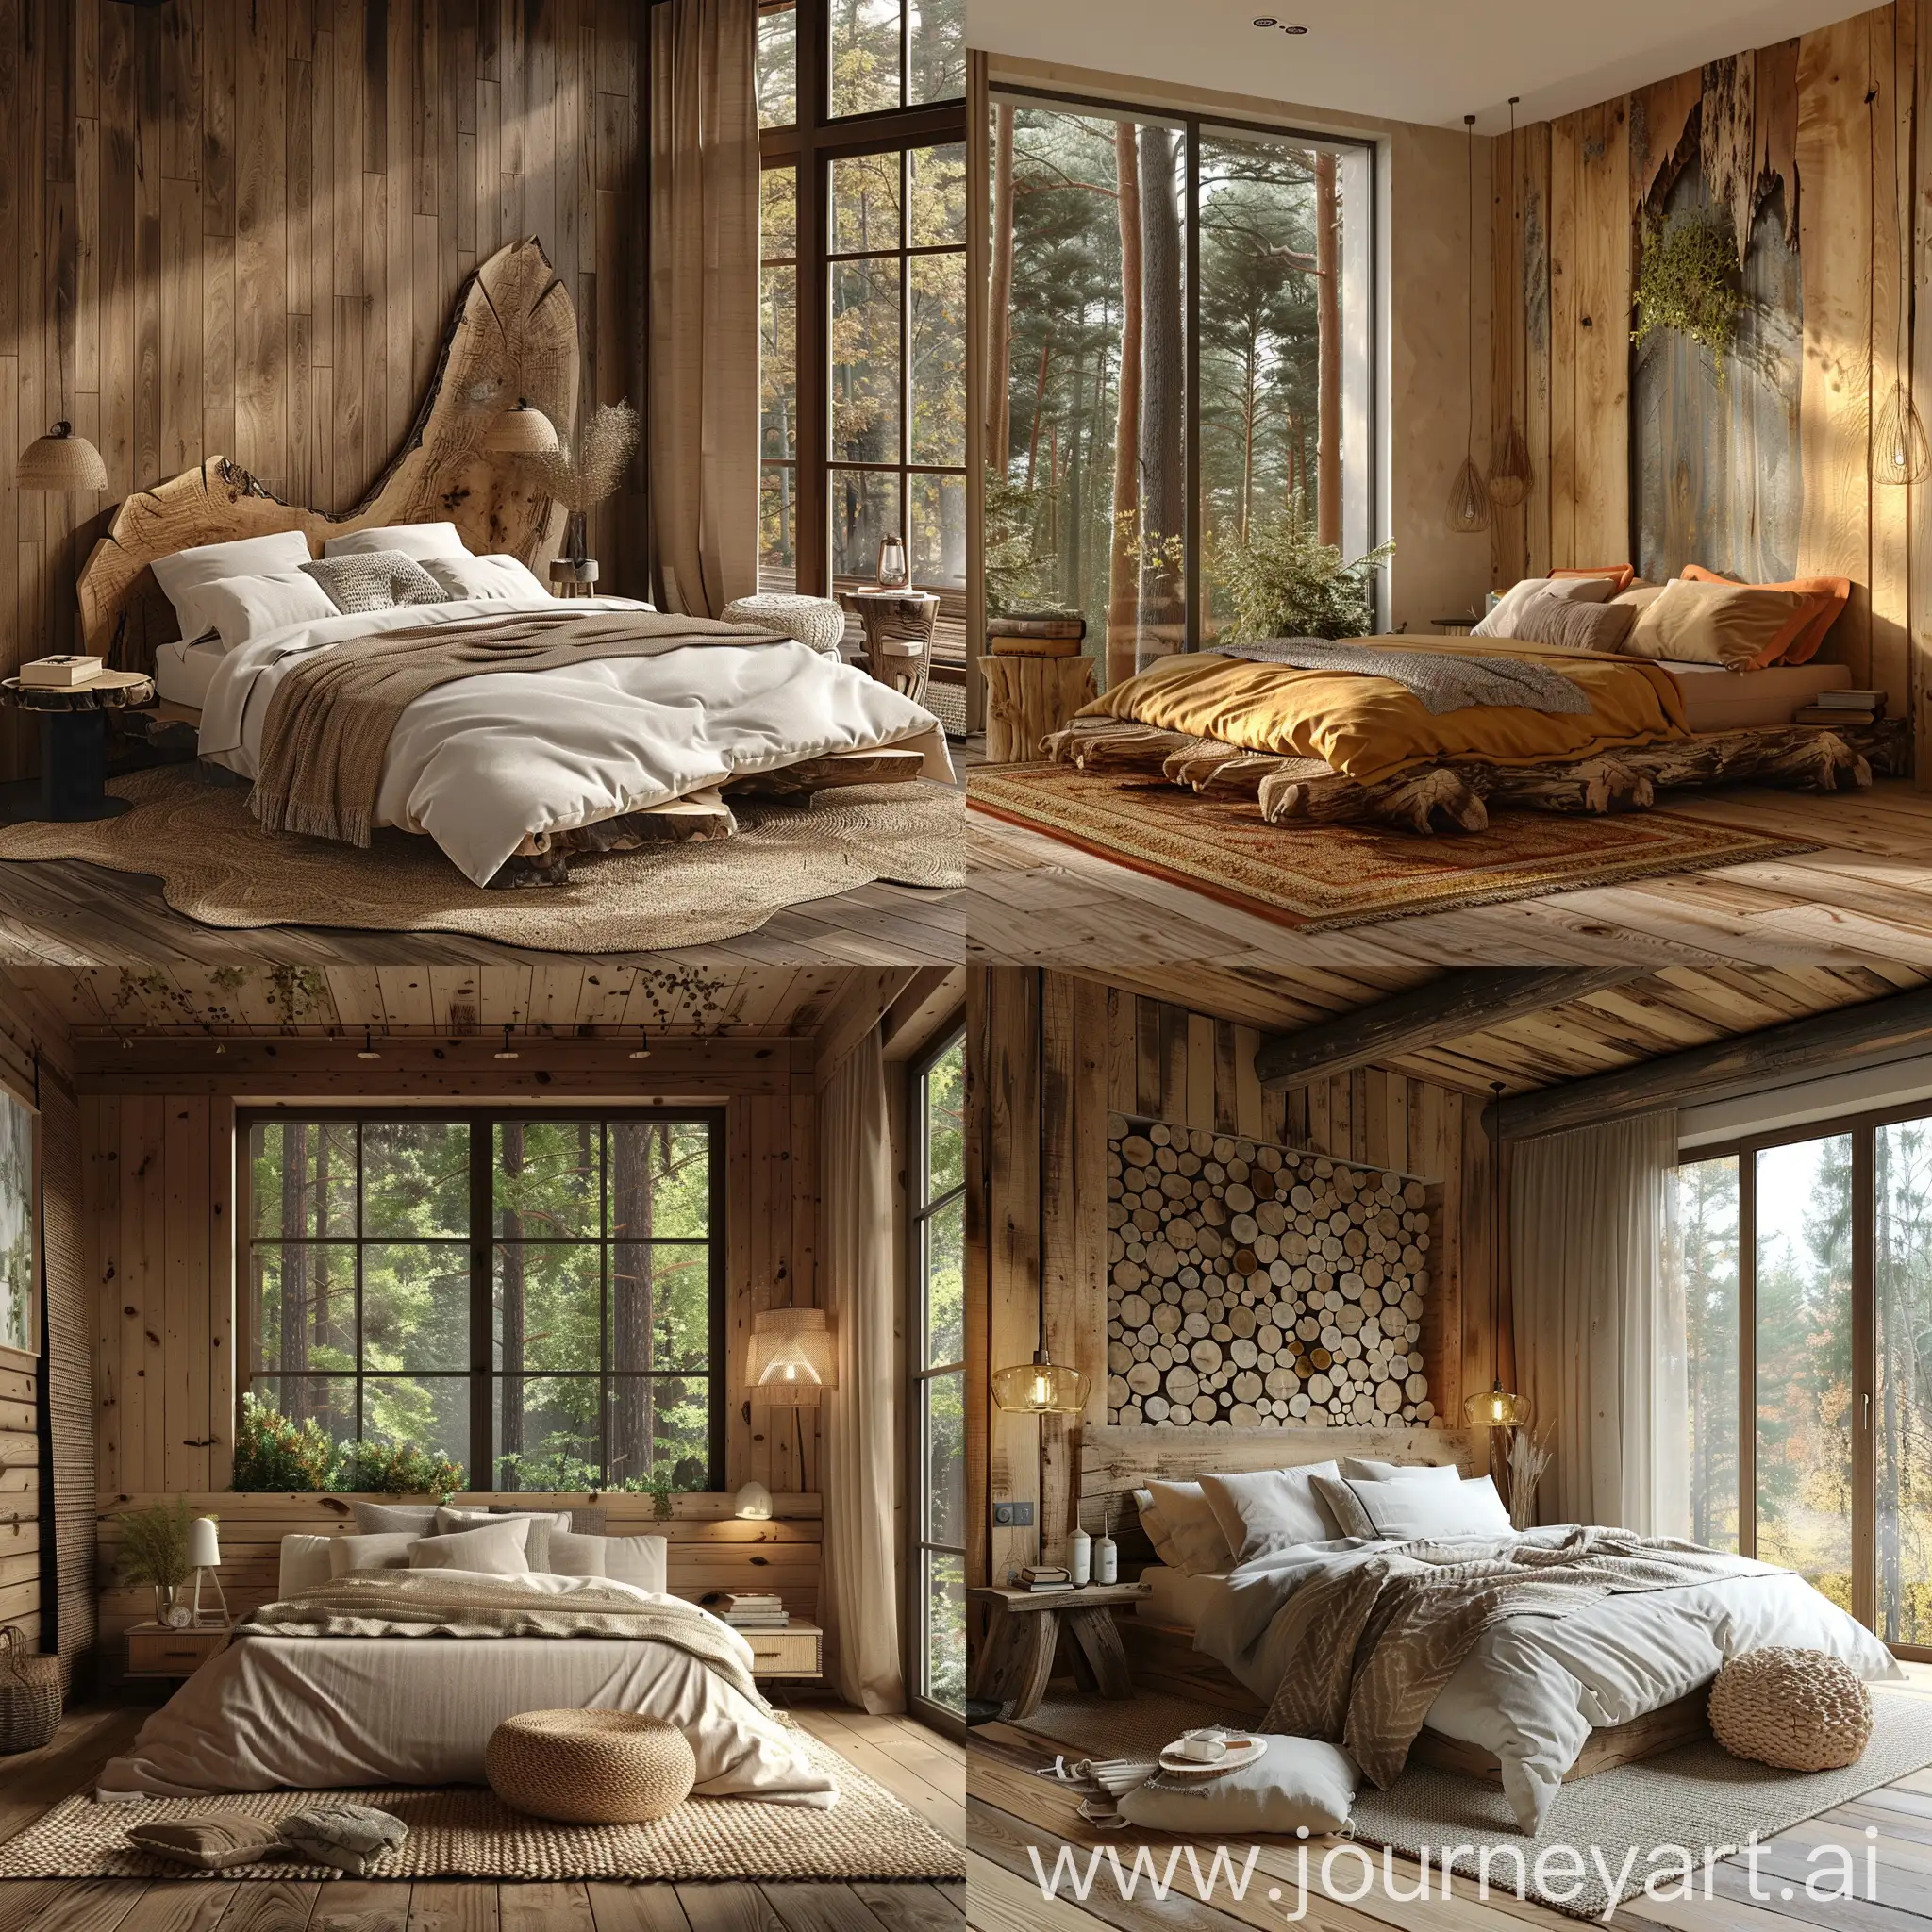 Tranquil-ForestInspired-Bedroom-Design-with-Natural-Wood-Elements